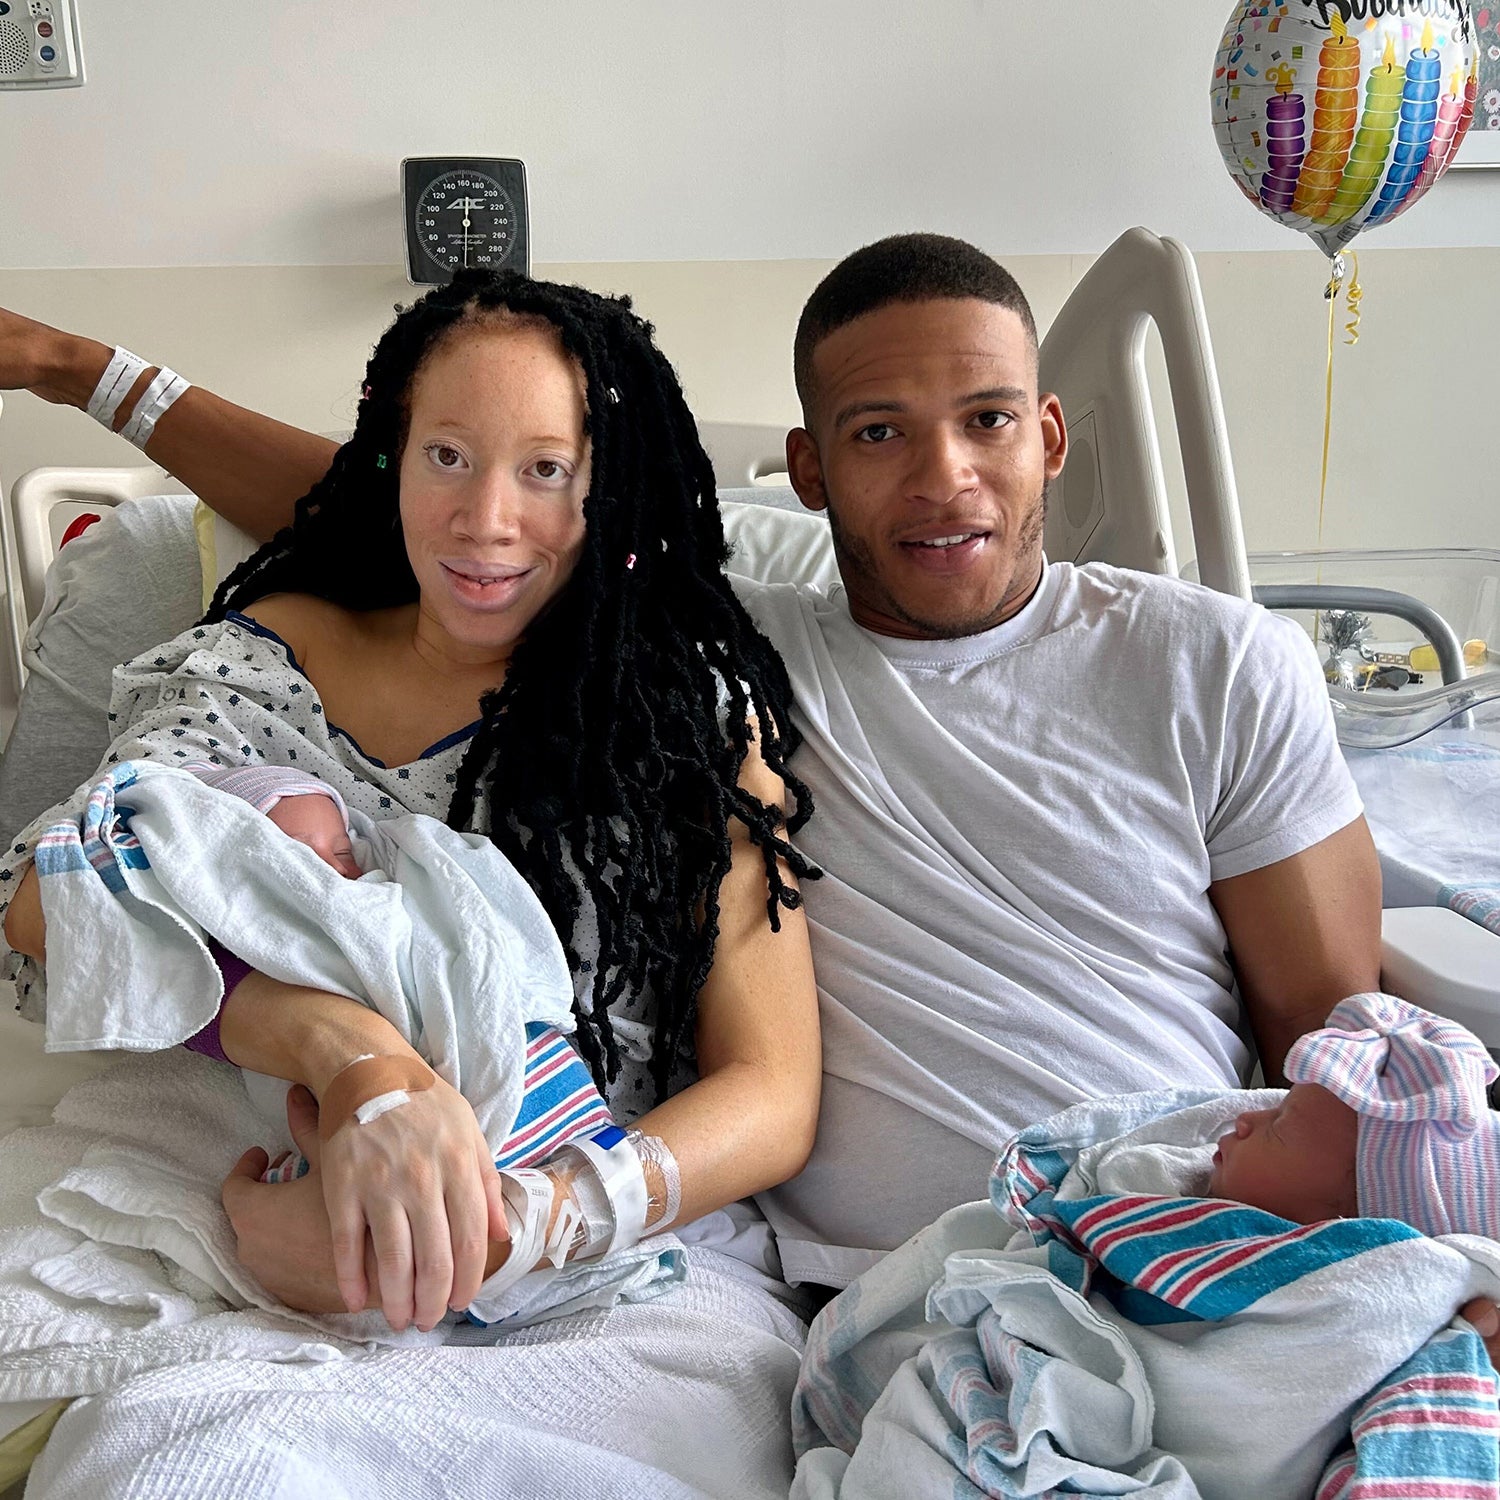 “Best Birthday Present Ever”: Ohio Couple Welcomes Twins Born On The Same Day As Their Shared Birthday